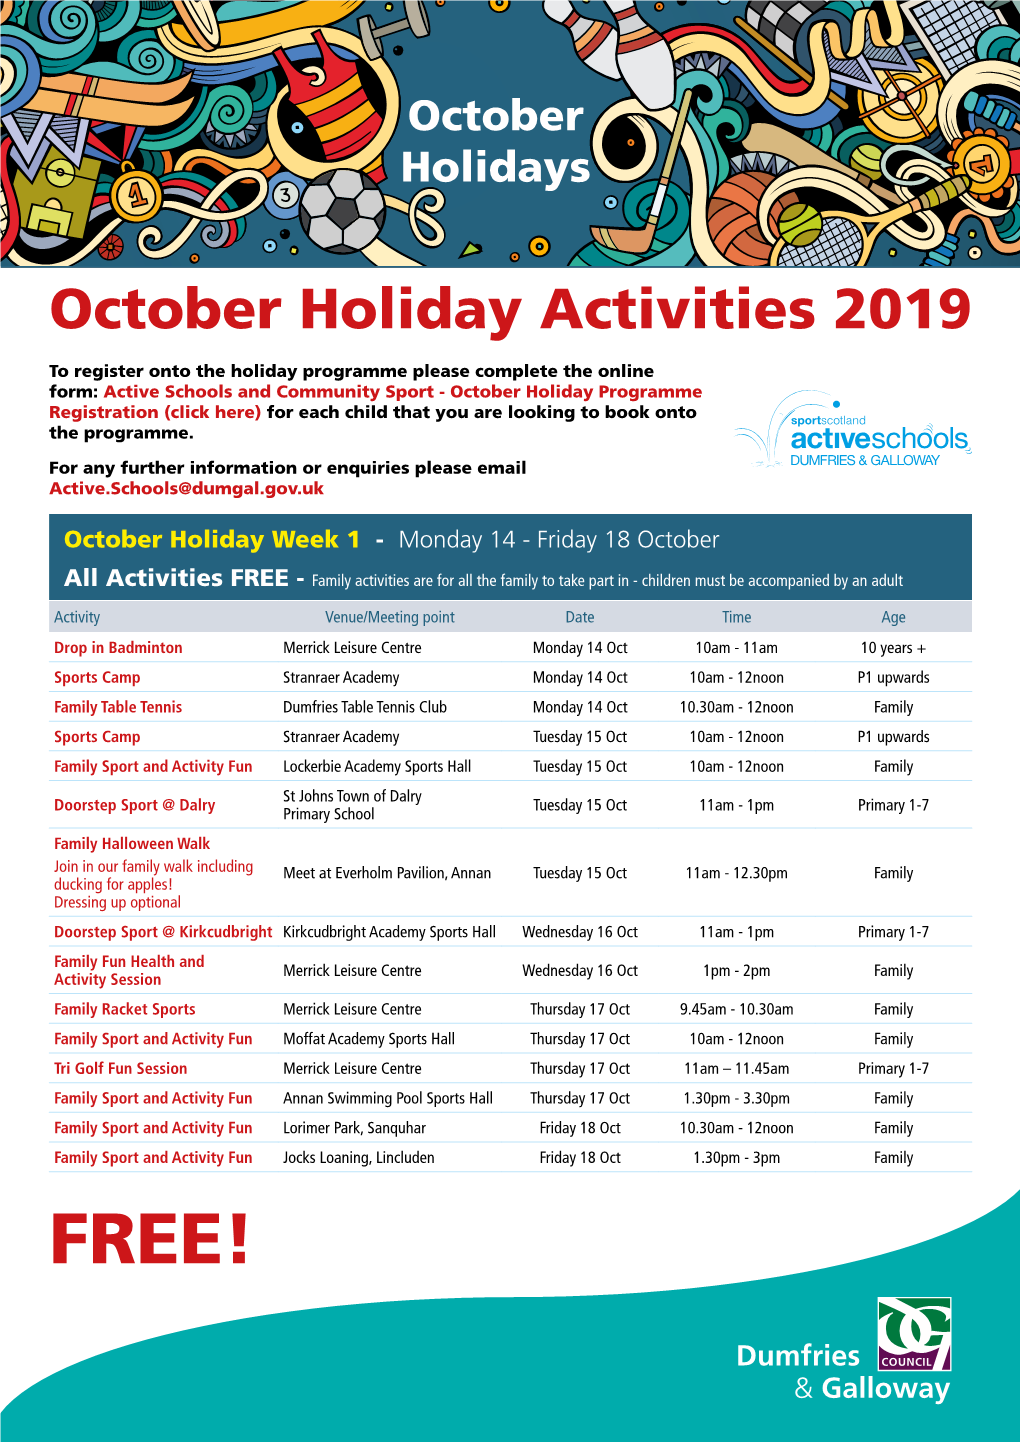 October Holiday Activities 2019